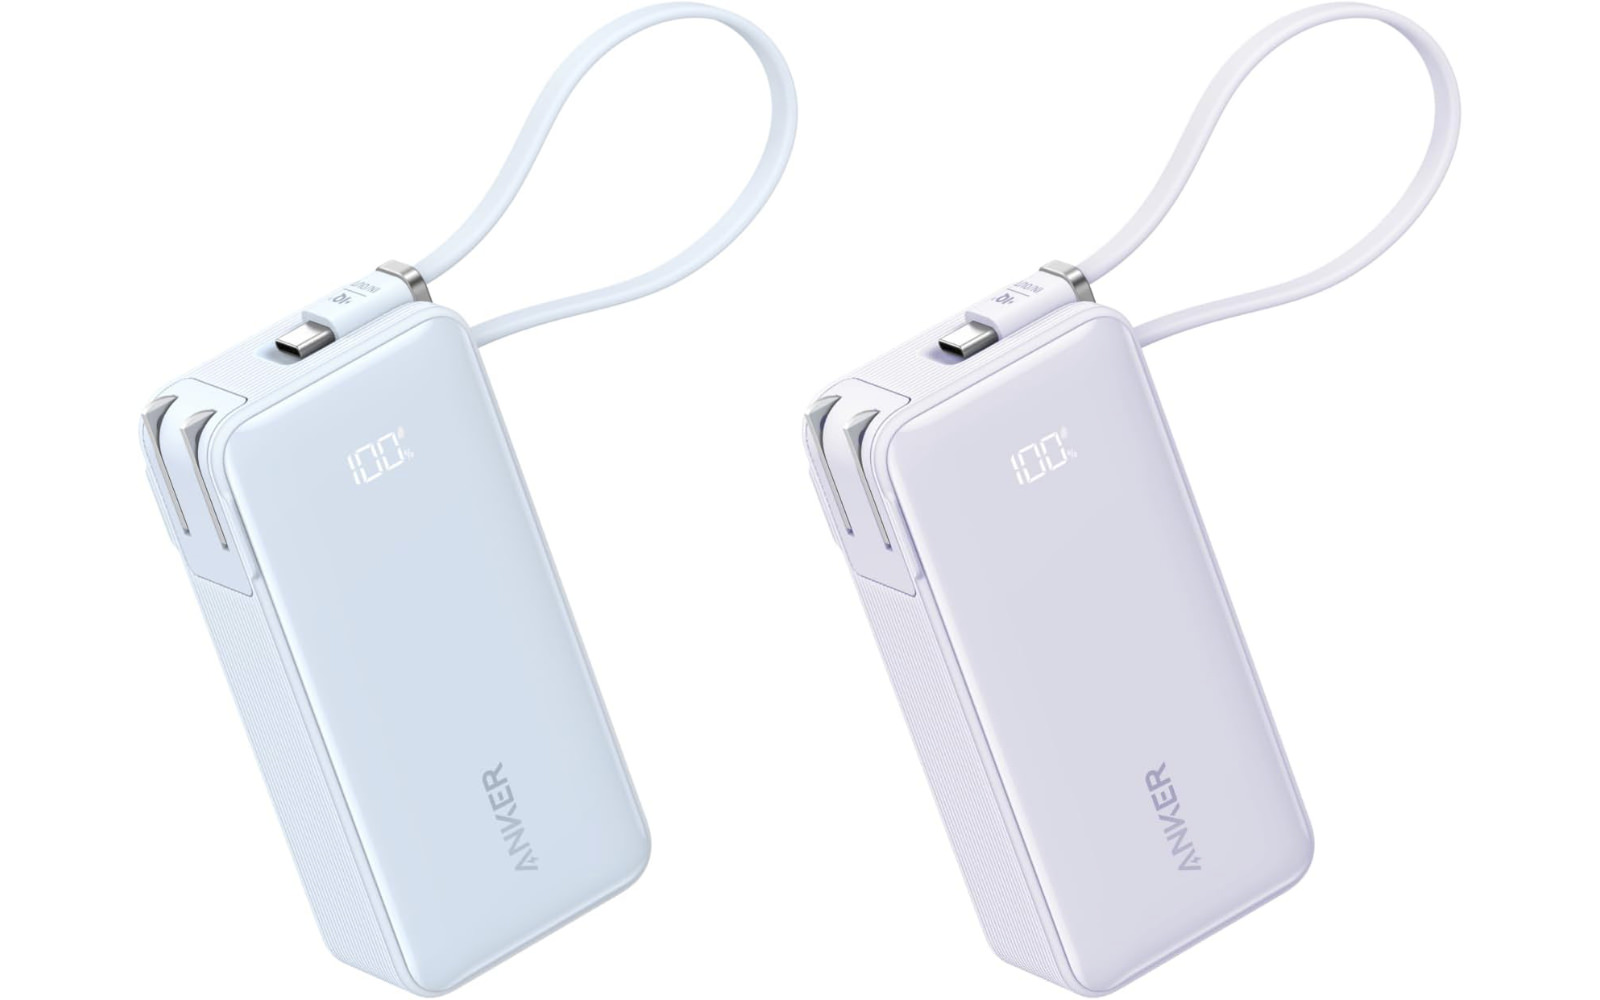 Anker Power Bank new colors